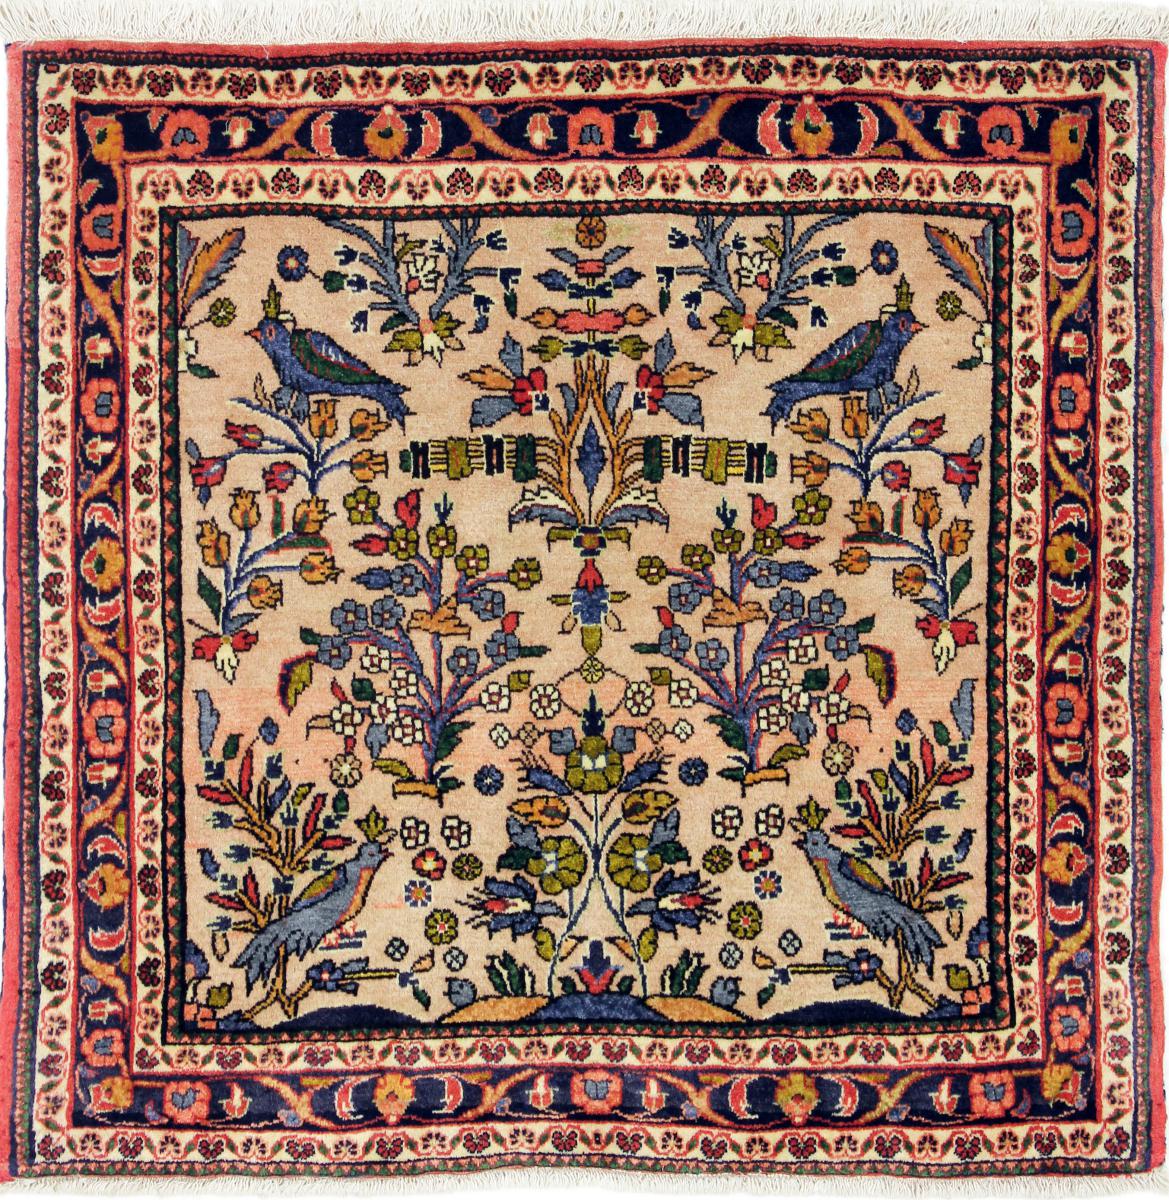 Persian Rug Hamadan 3'1"x3'3" 3'1"x3'3", Persian Rug Knotted by hand